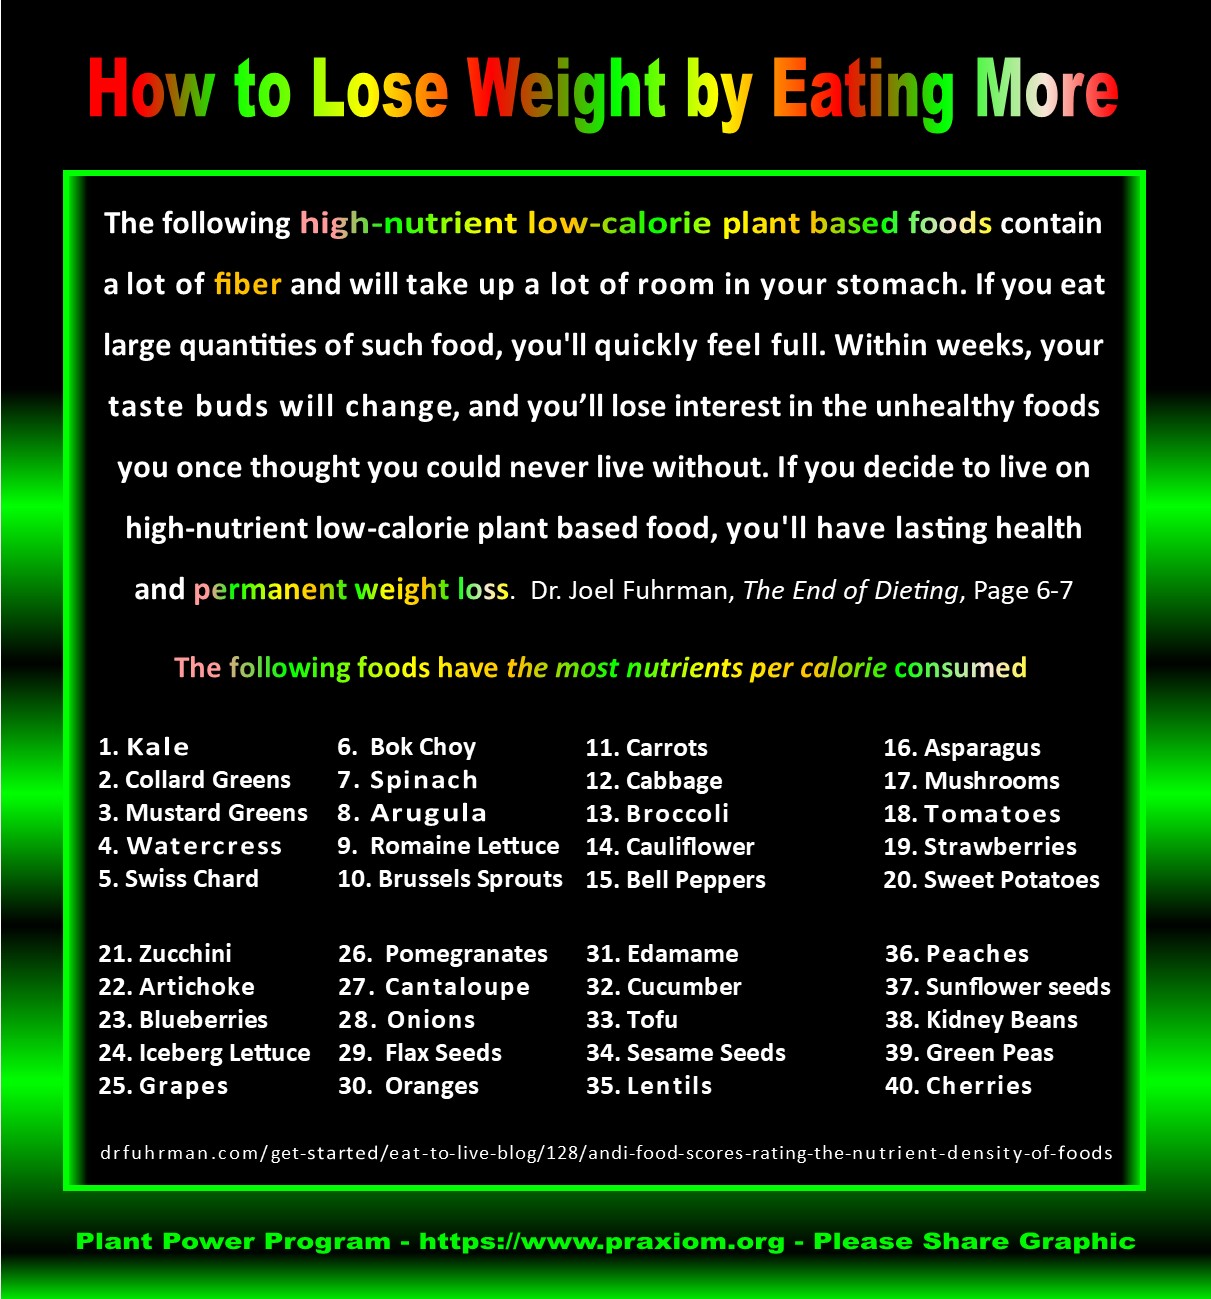 How to Lose Weight by Eating More - Dr. Joel Fuhrman